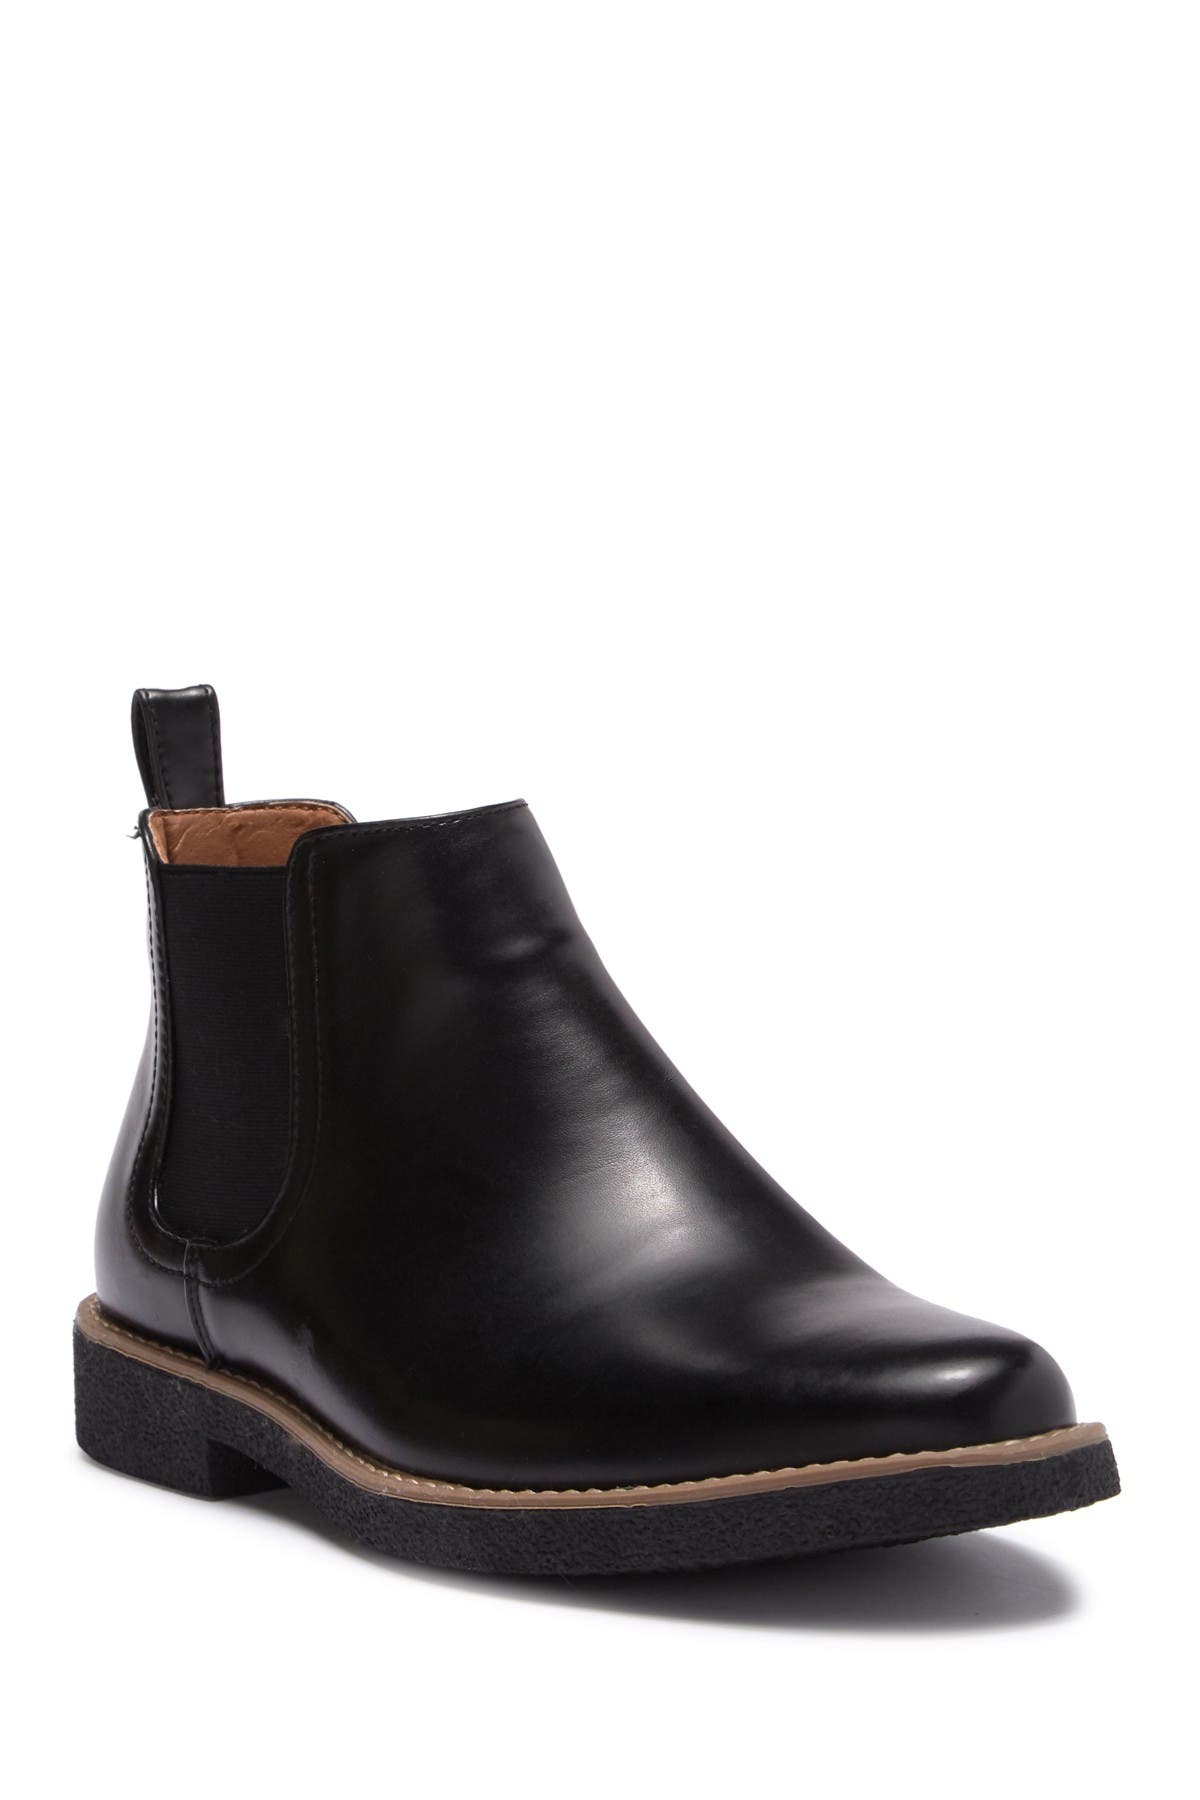 wide mens chelsea boots